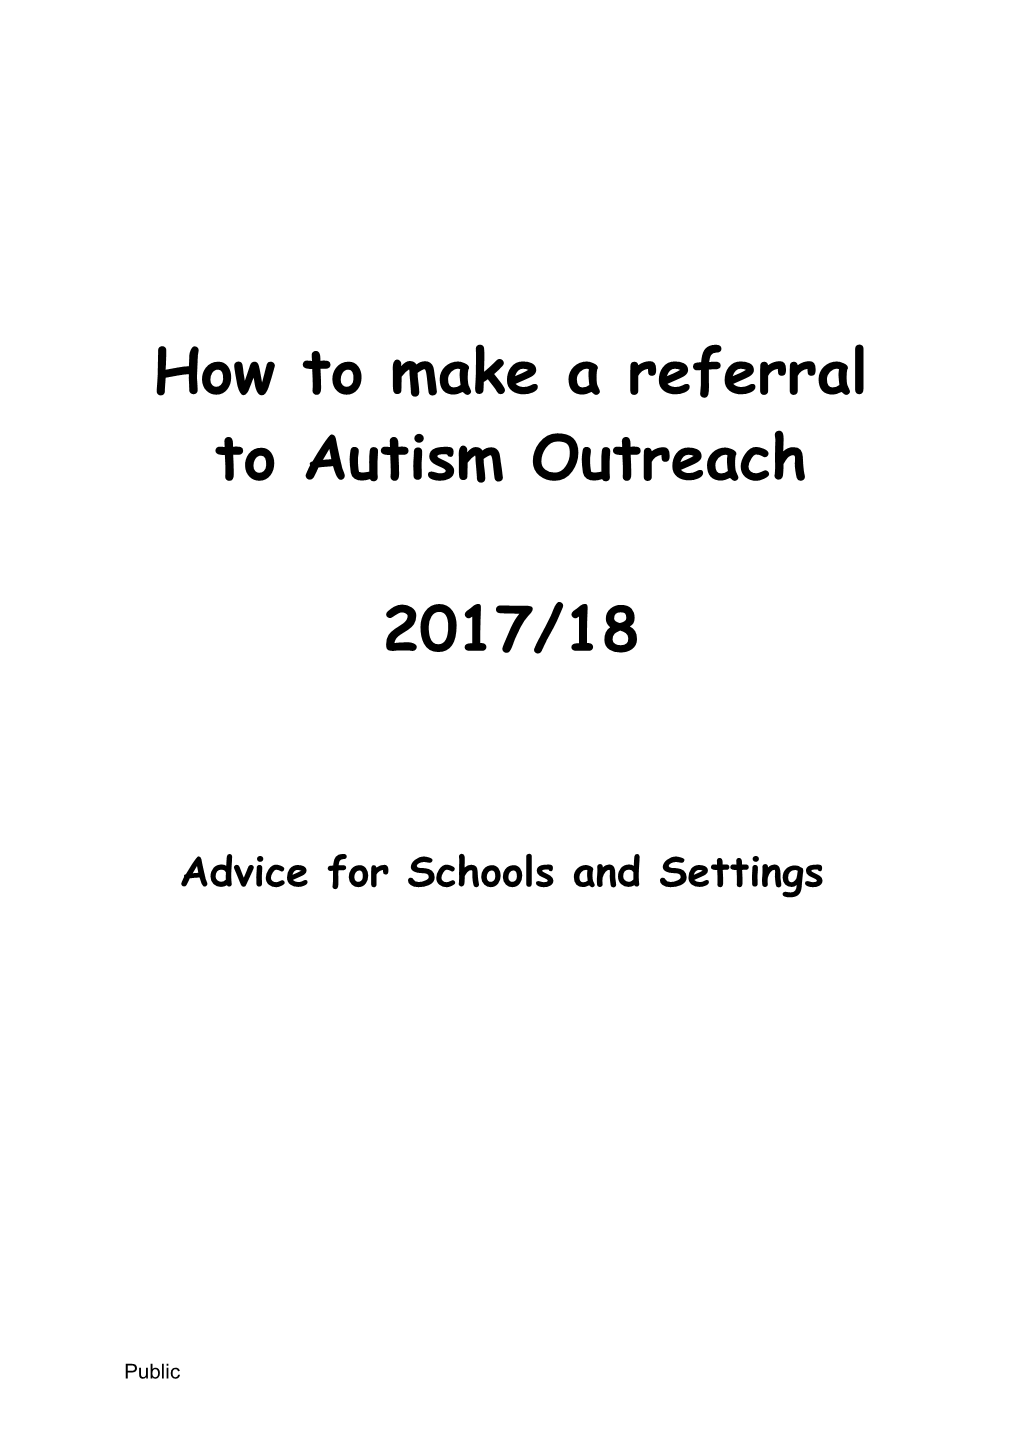 How to Make a Referral to Autism Outreach